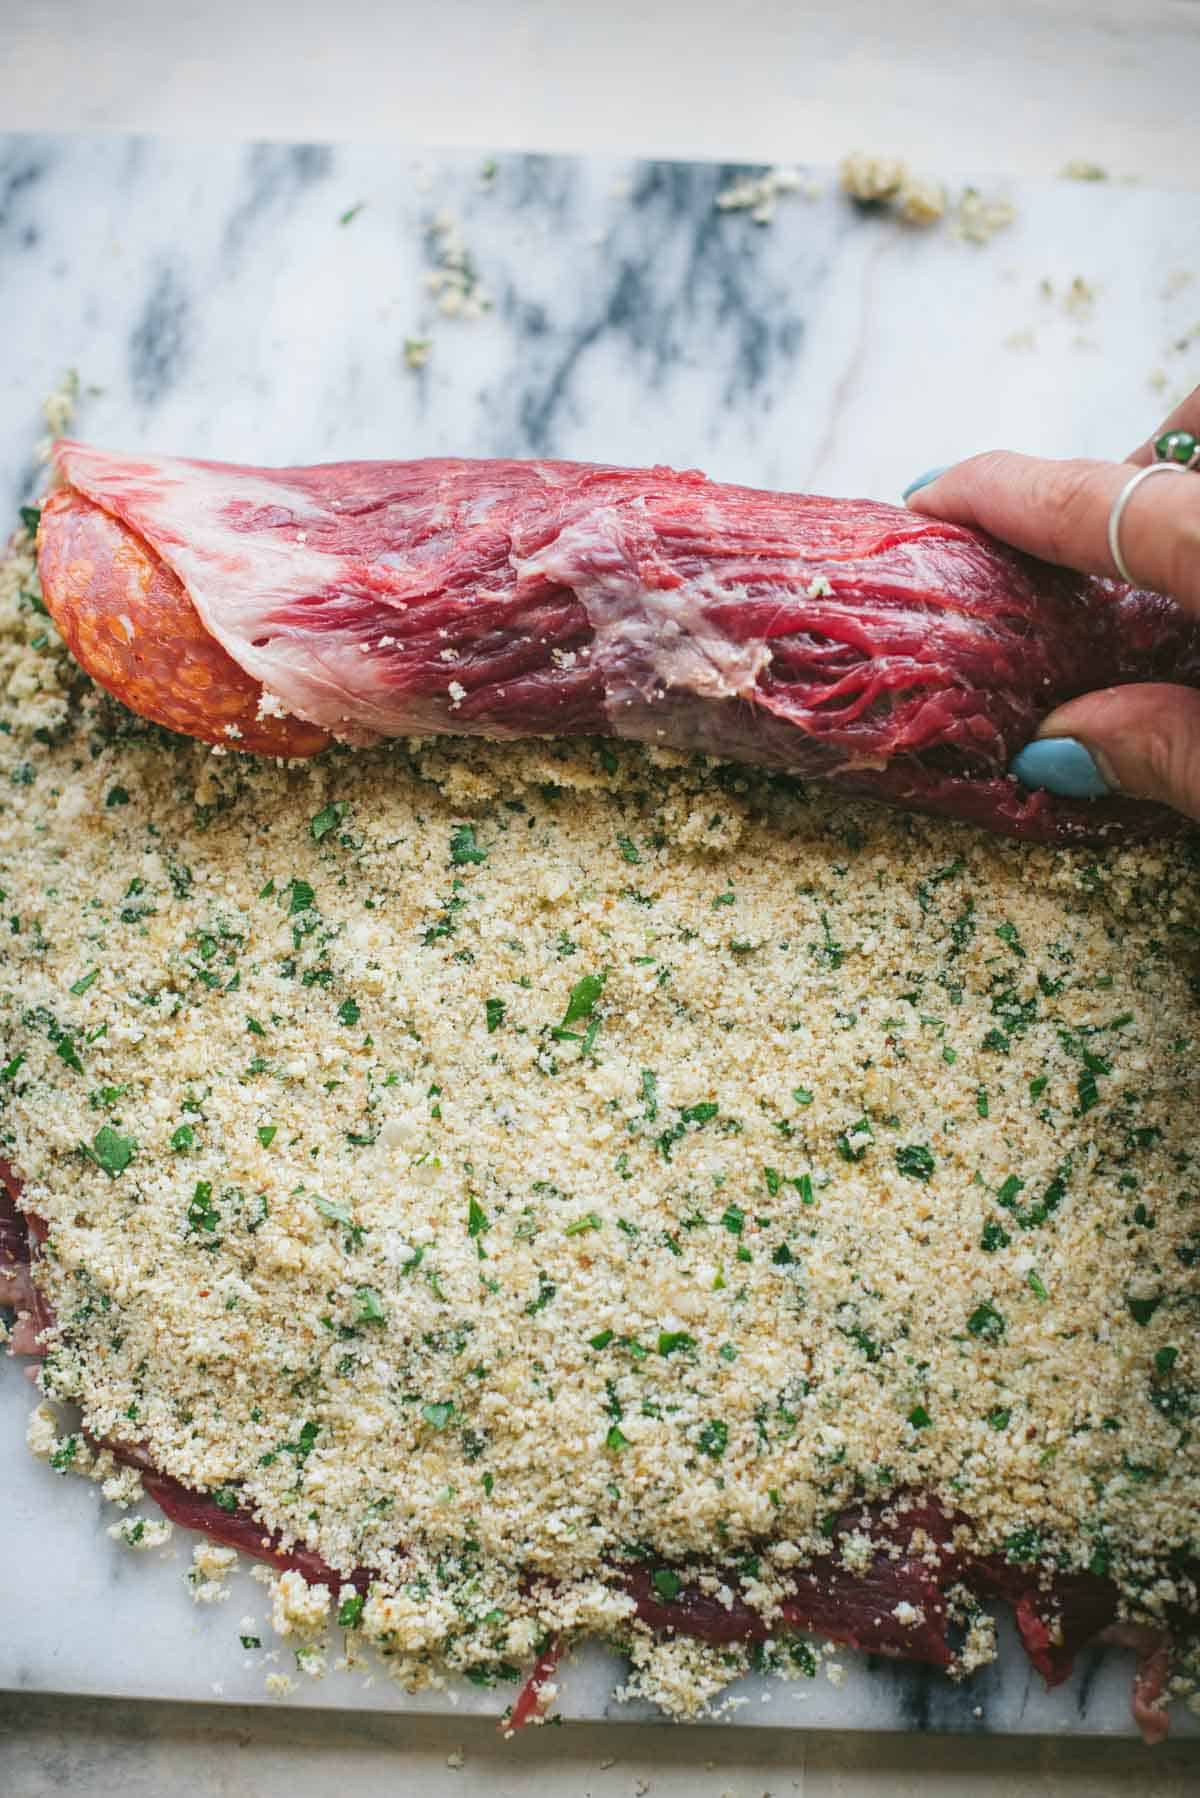 The flank steak has now had the cheese and breadcrumb mixture layered on top of the cured meats. There is a hand rolling the meat up into a log - like a cinnamon roll.